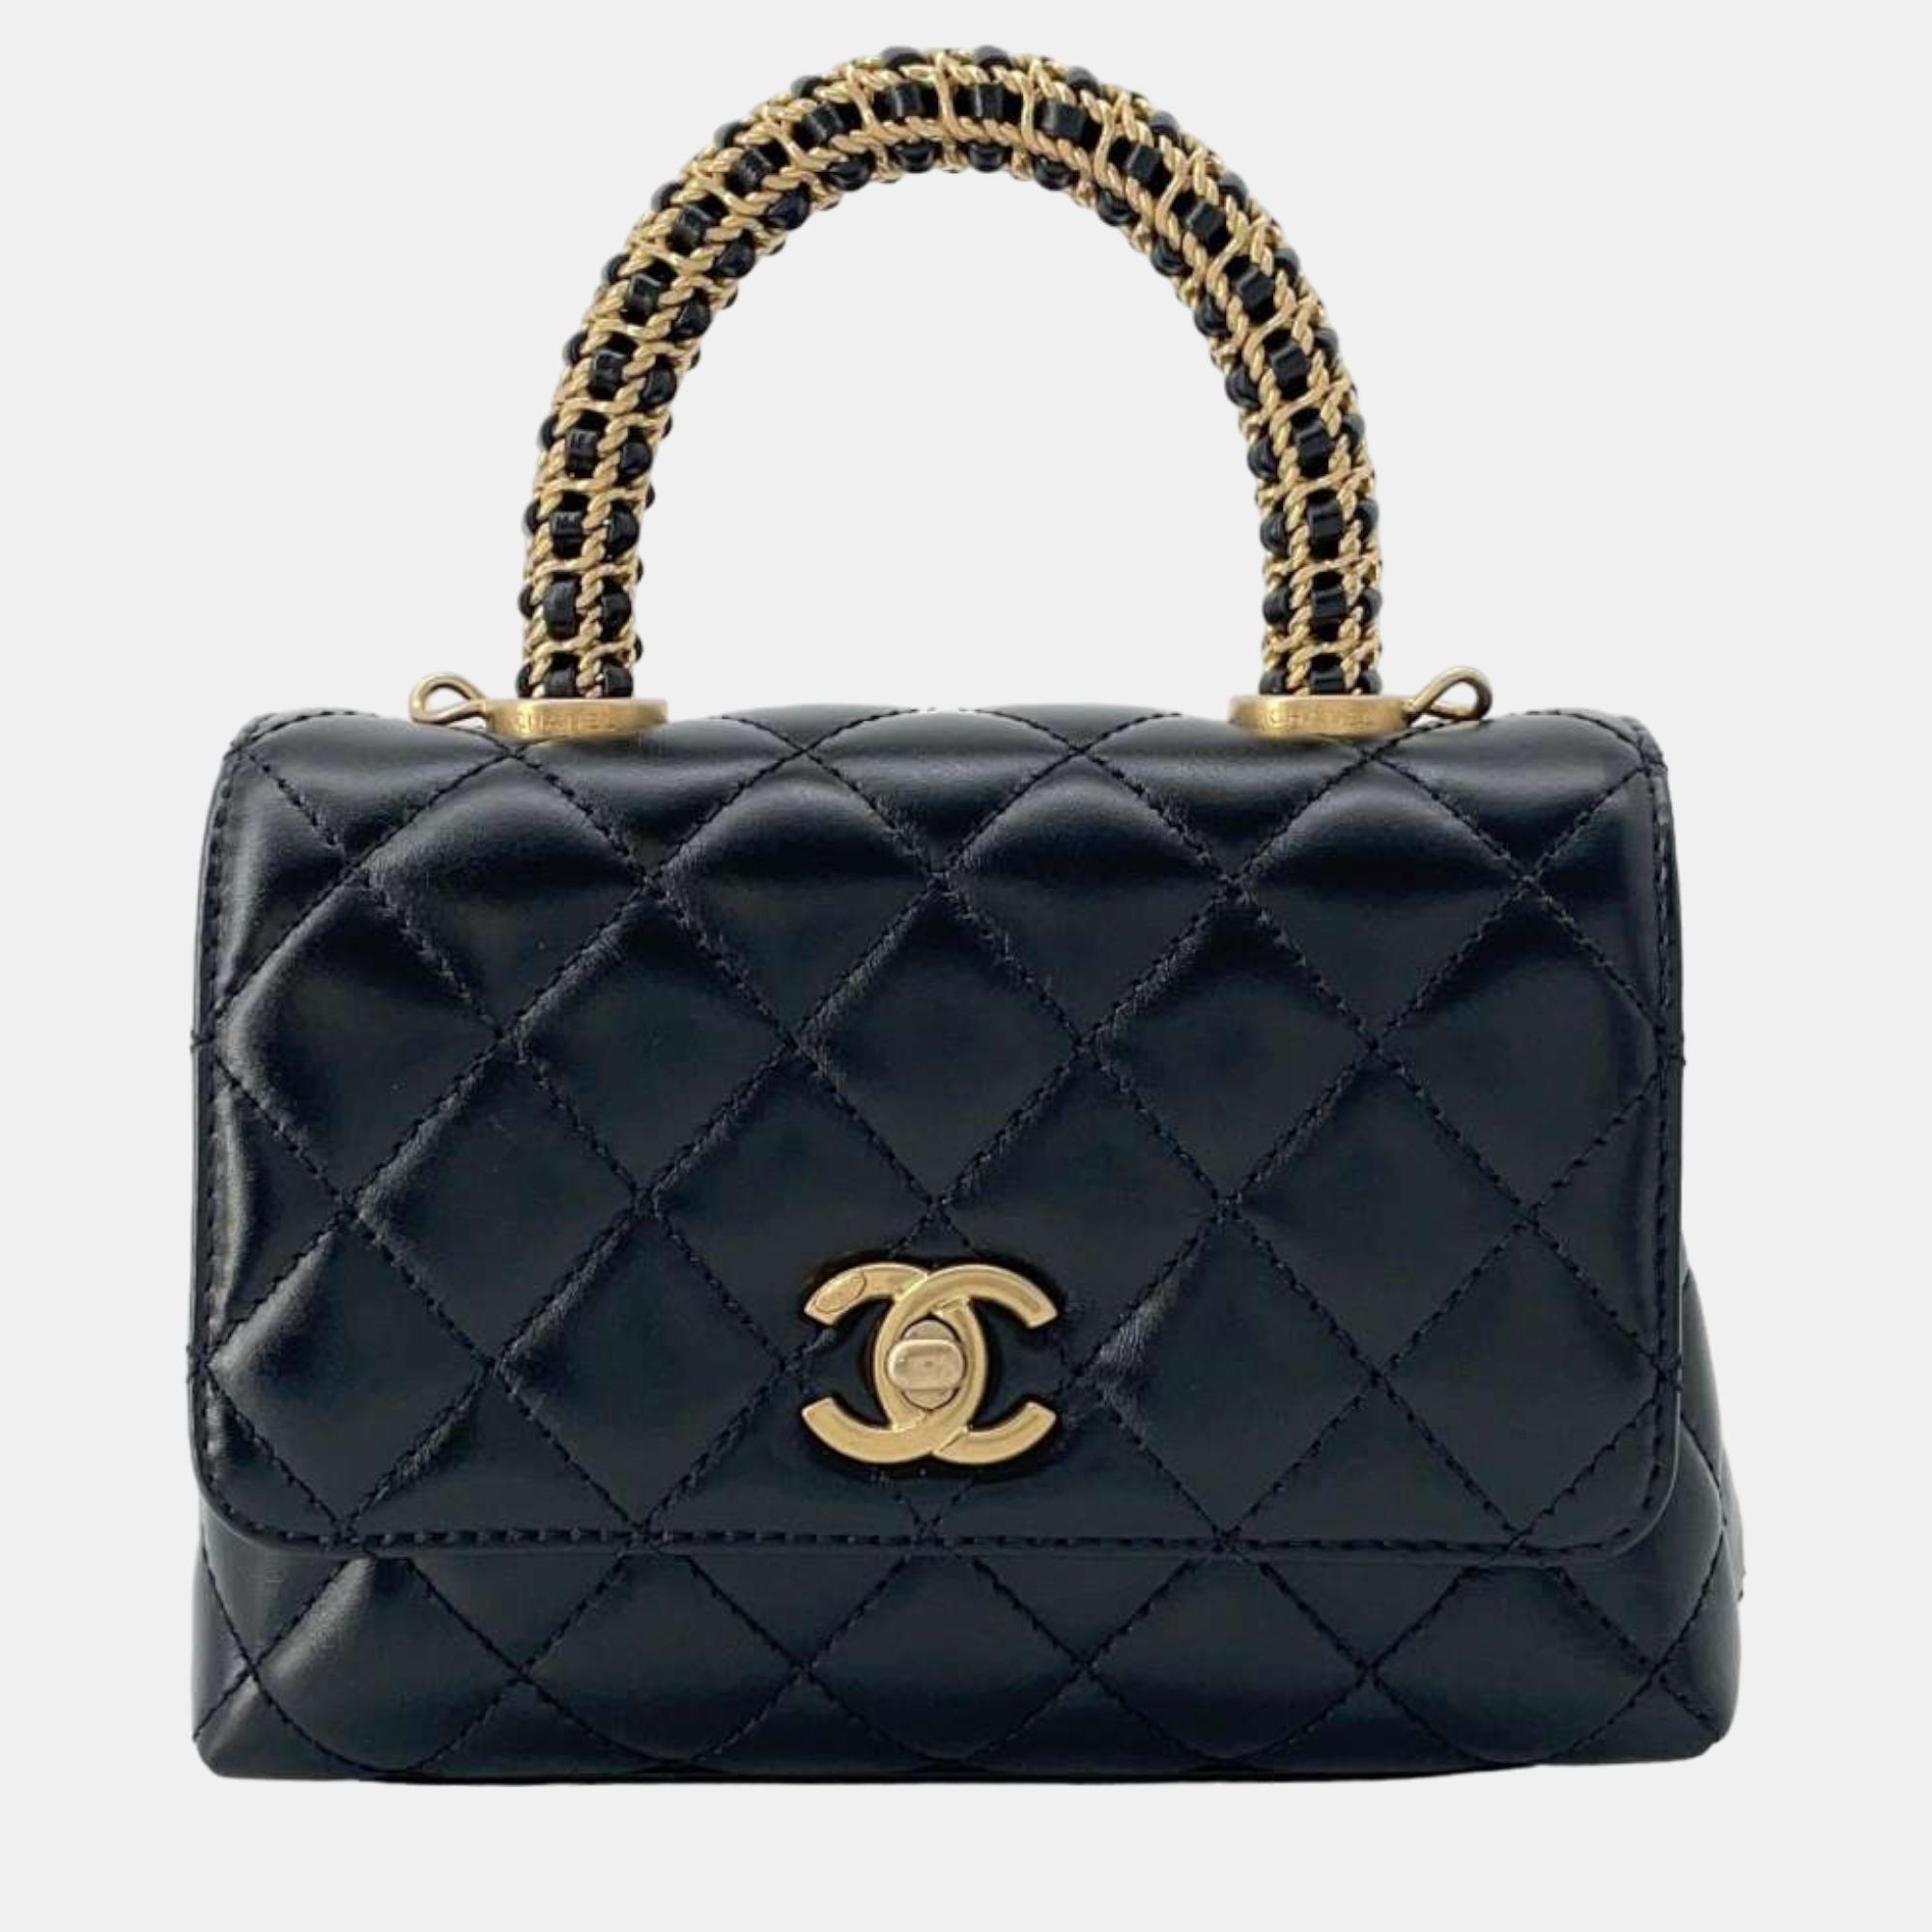 Chanel black leather extra mini woven chain coco handle bag